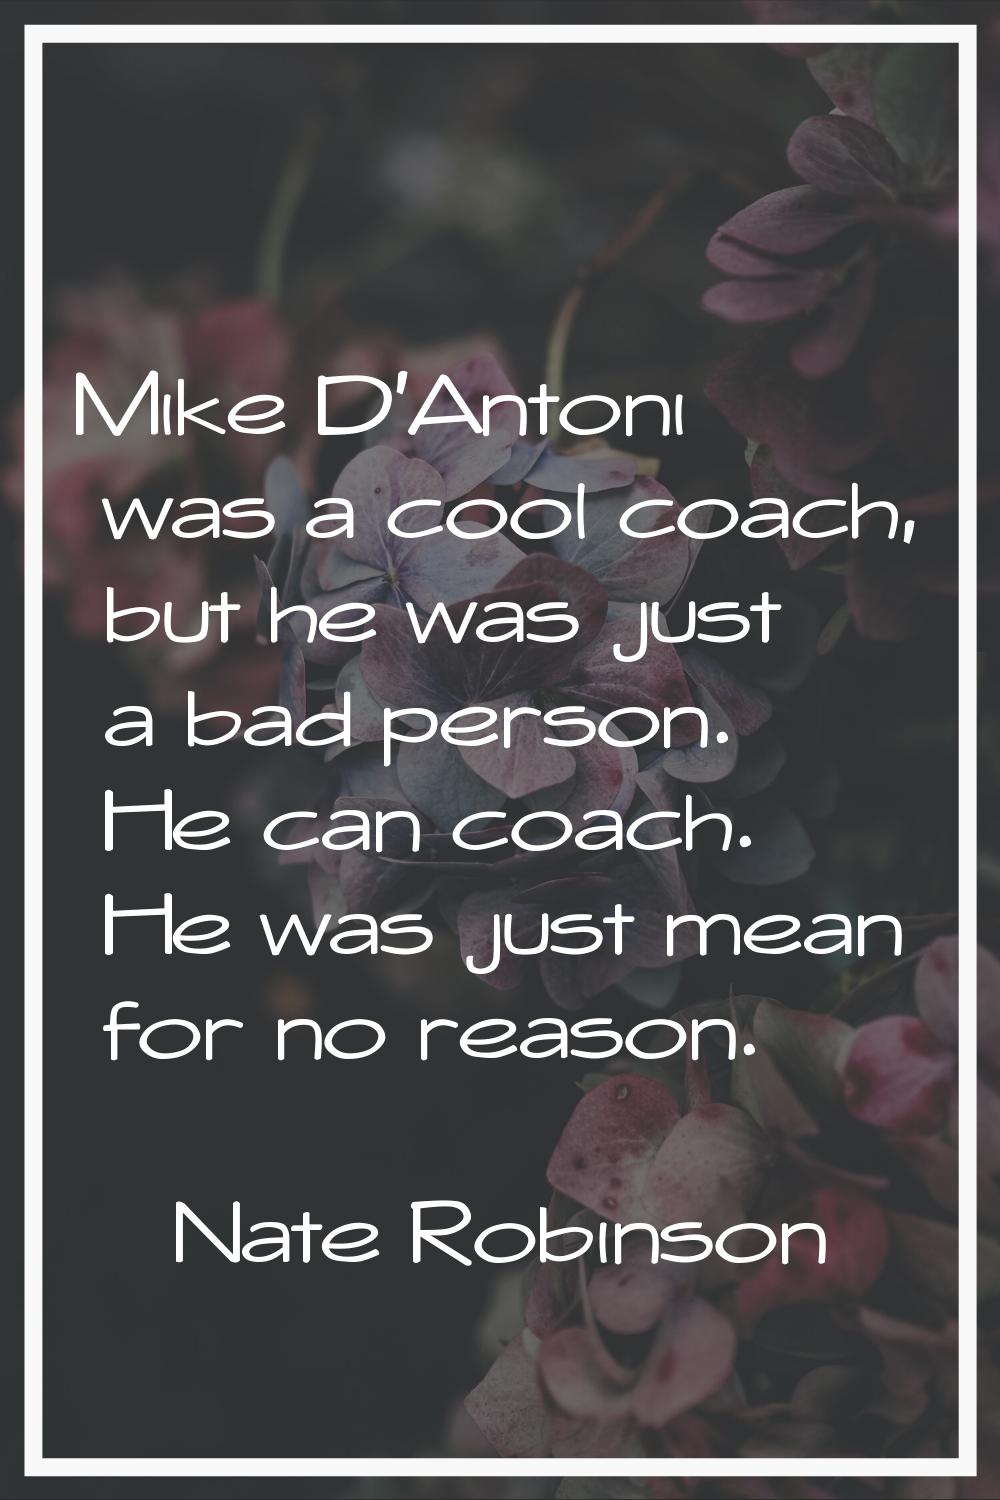 Mike D'Antoni was a cool coach, but he was just a bad person. He can coach. He was just mean for no